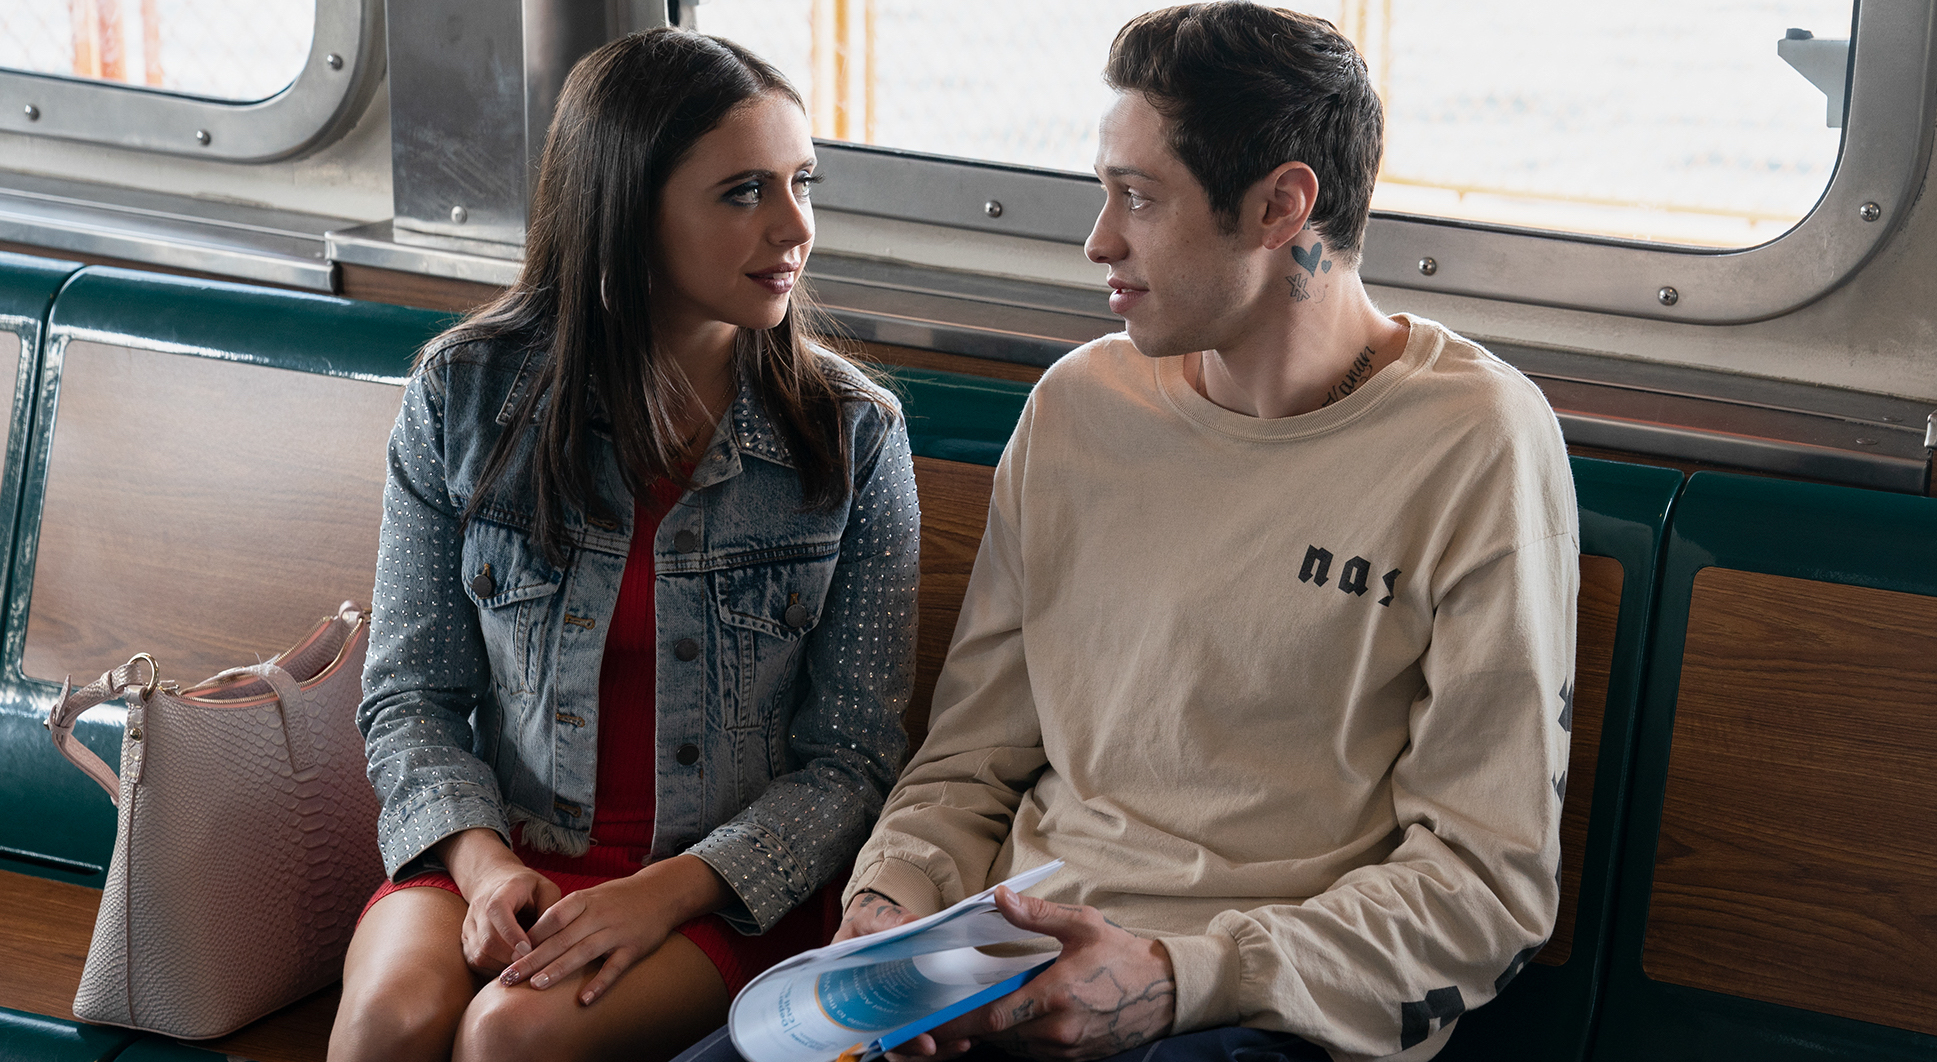 (from left) Kelsey (Bel Powley) and Scott Carlin (Pete Davidson) in The King of Staten Island, directed by Judd Apatow.